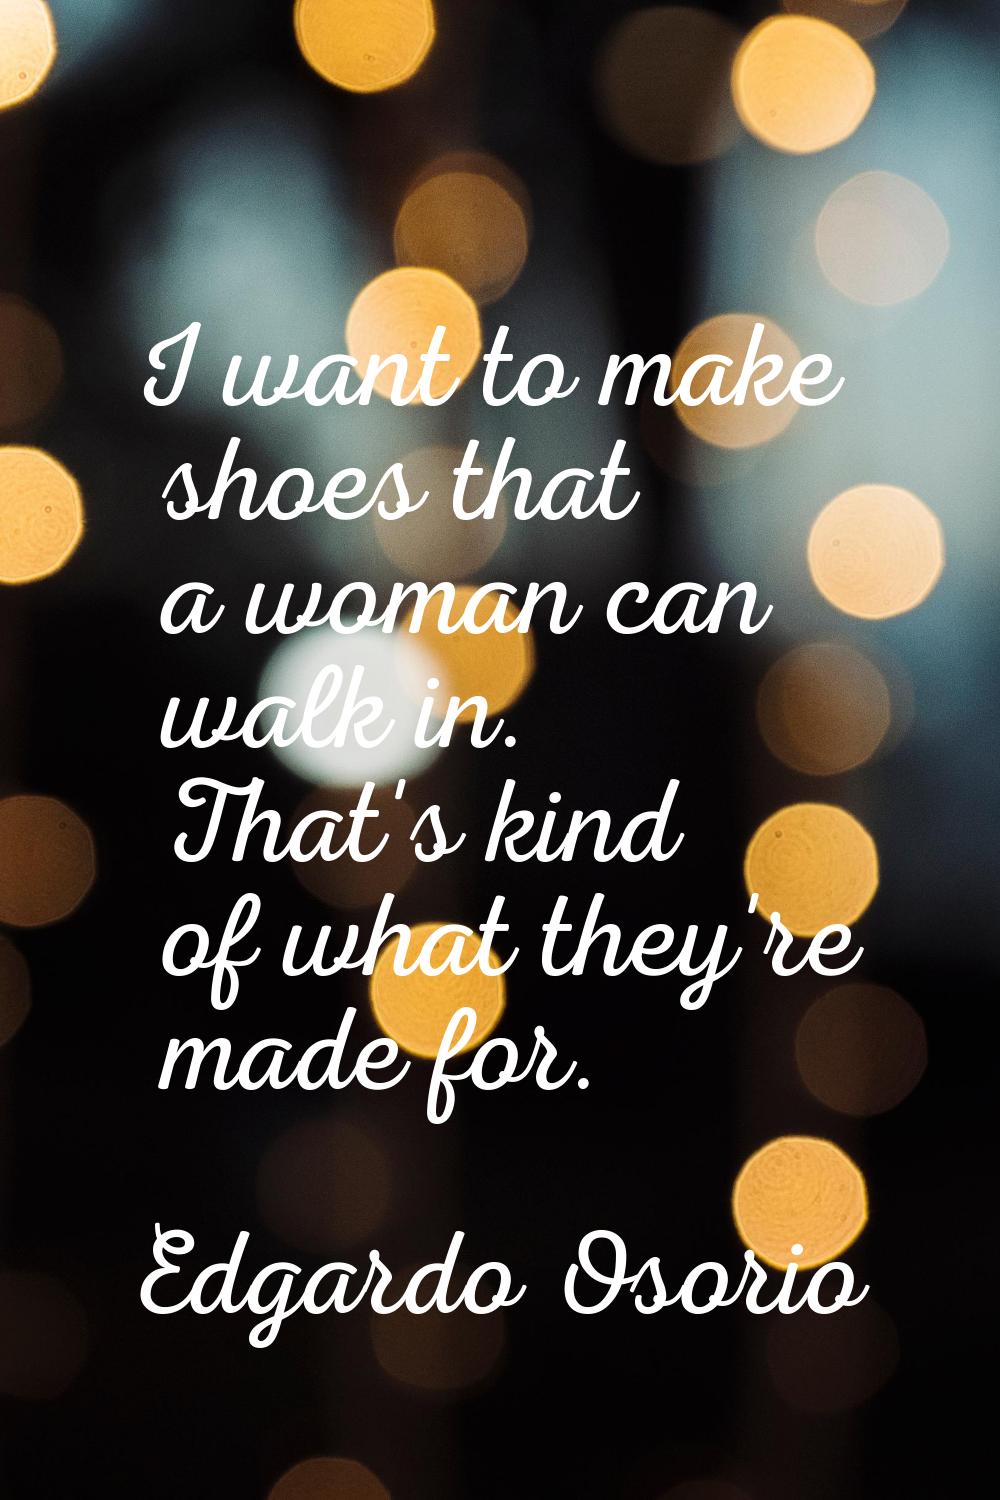 I want to make shoes that a woman can walk in. That's kind of what they're made for.